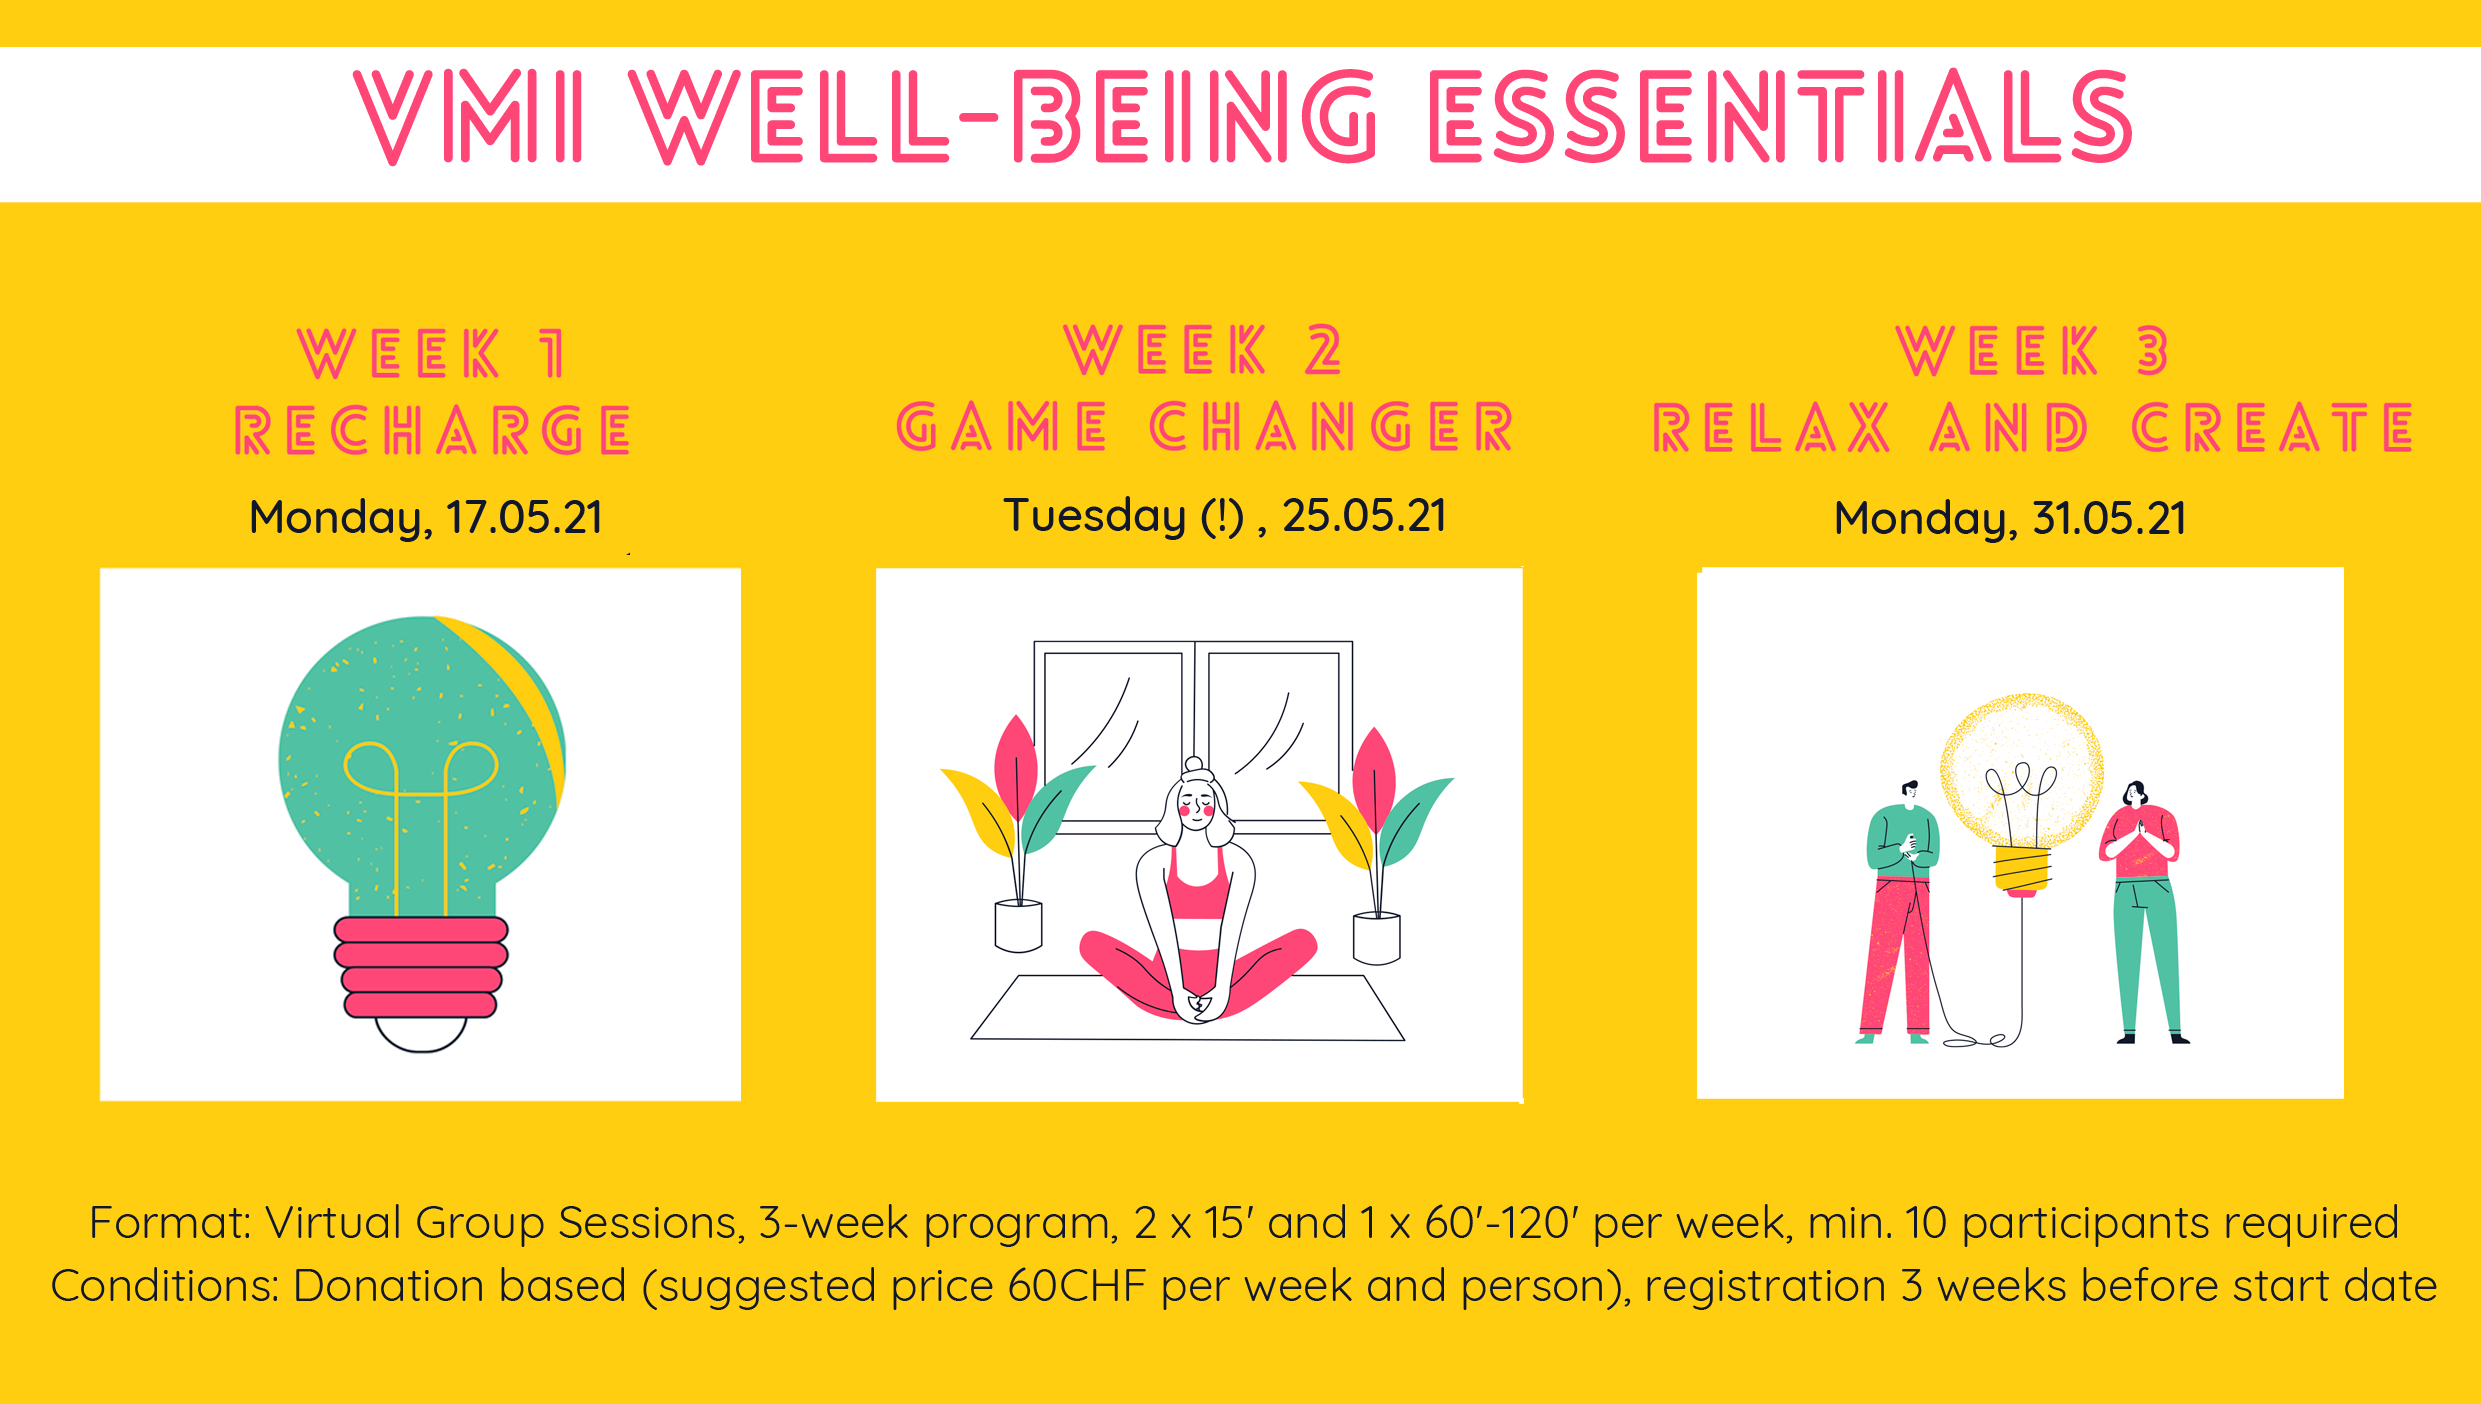 Well-Being Essentials Overview